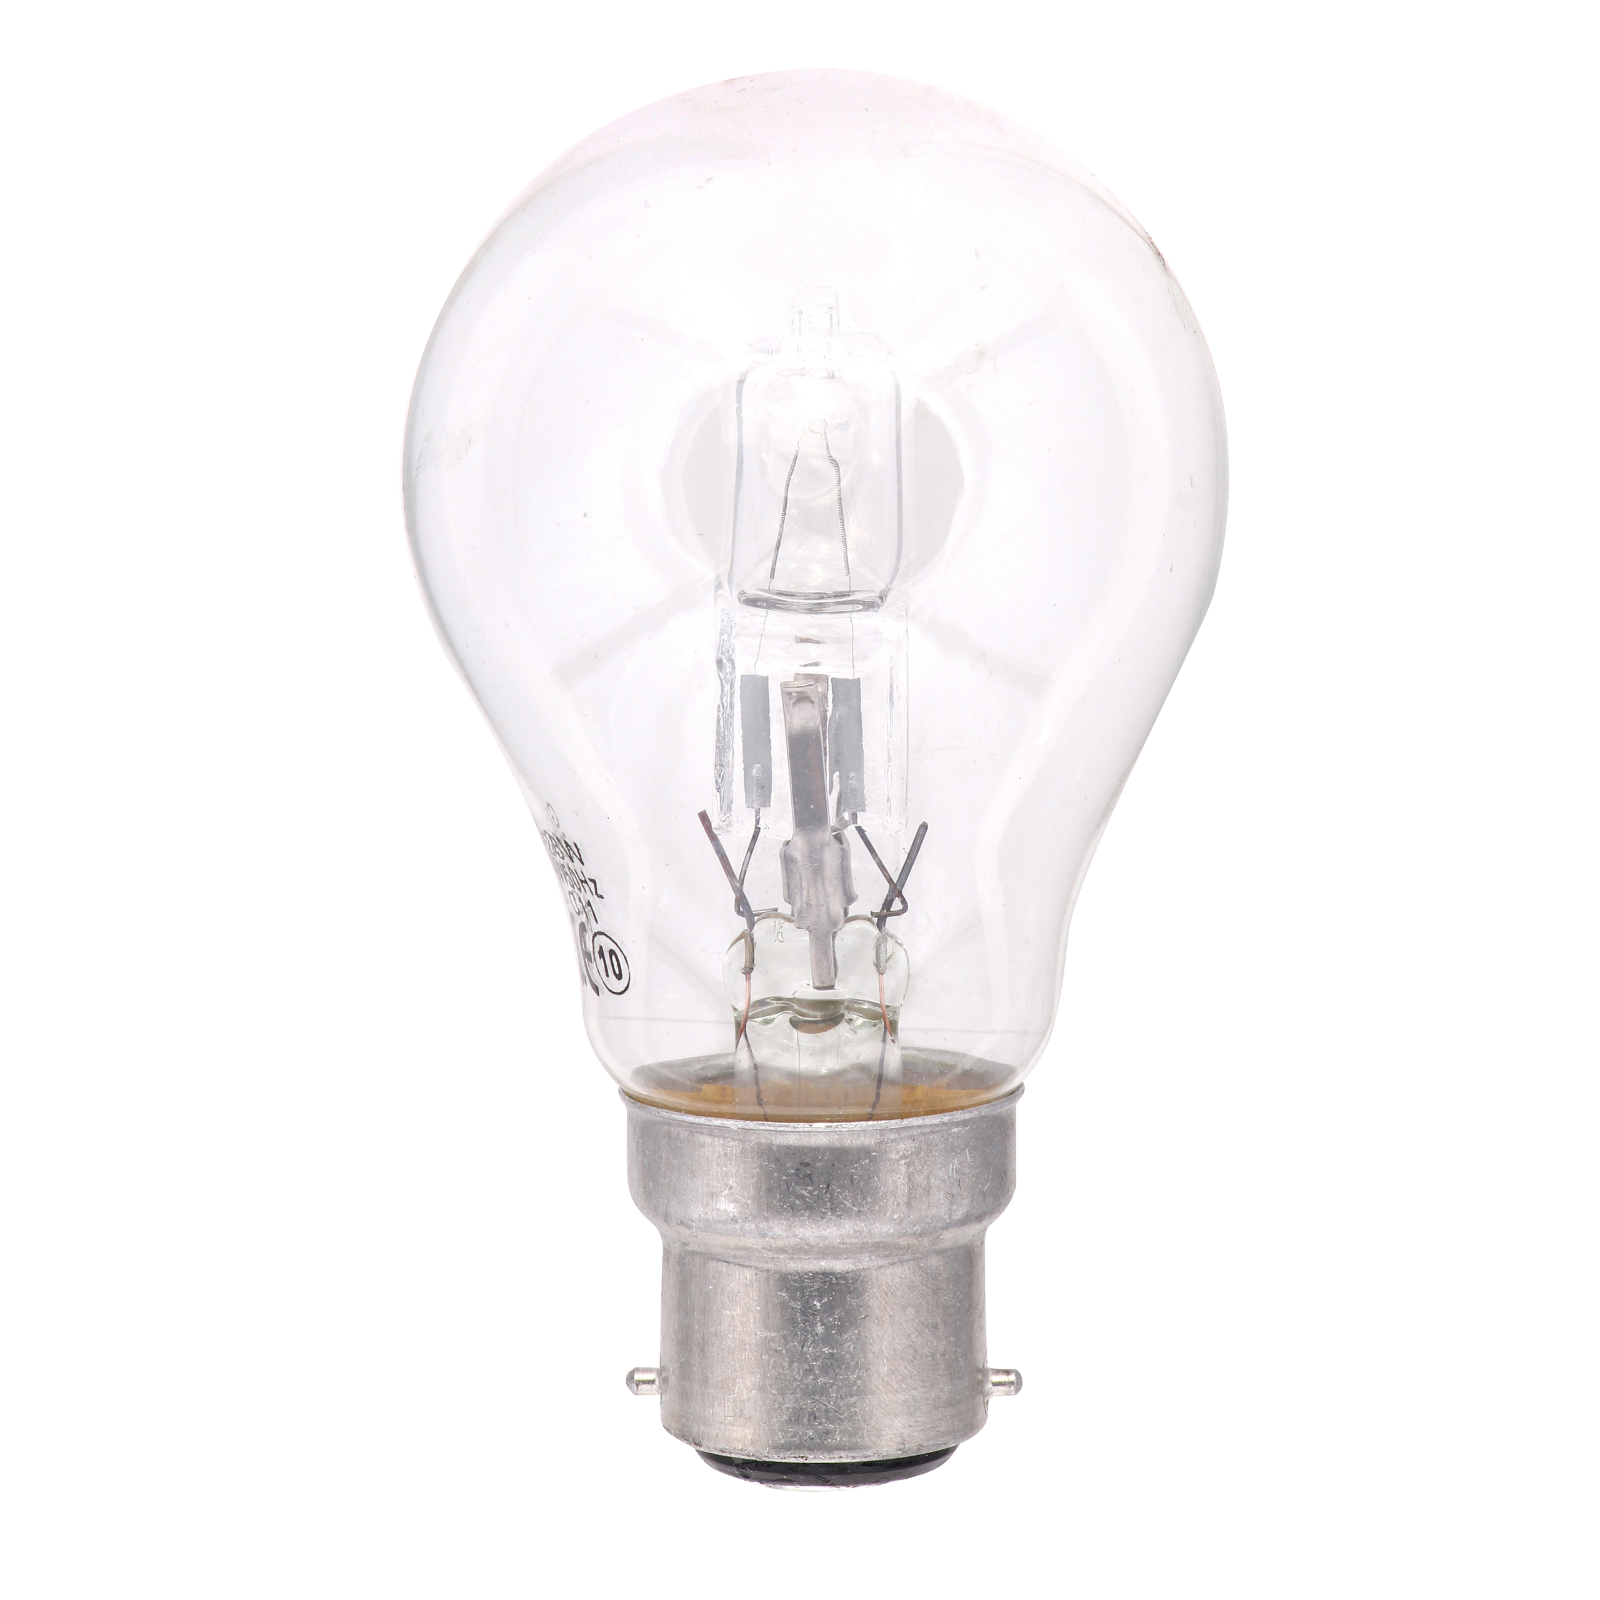 42W Halogen Energy Saving Clear GLS Lamp BC (equivalent To 60W) - HALO-G42BC 